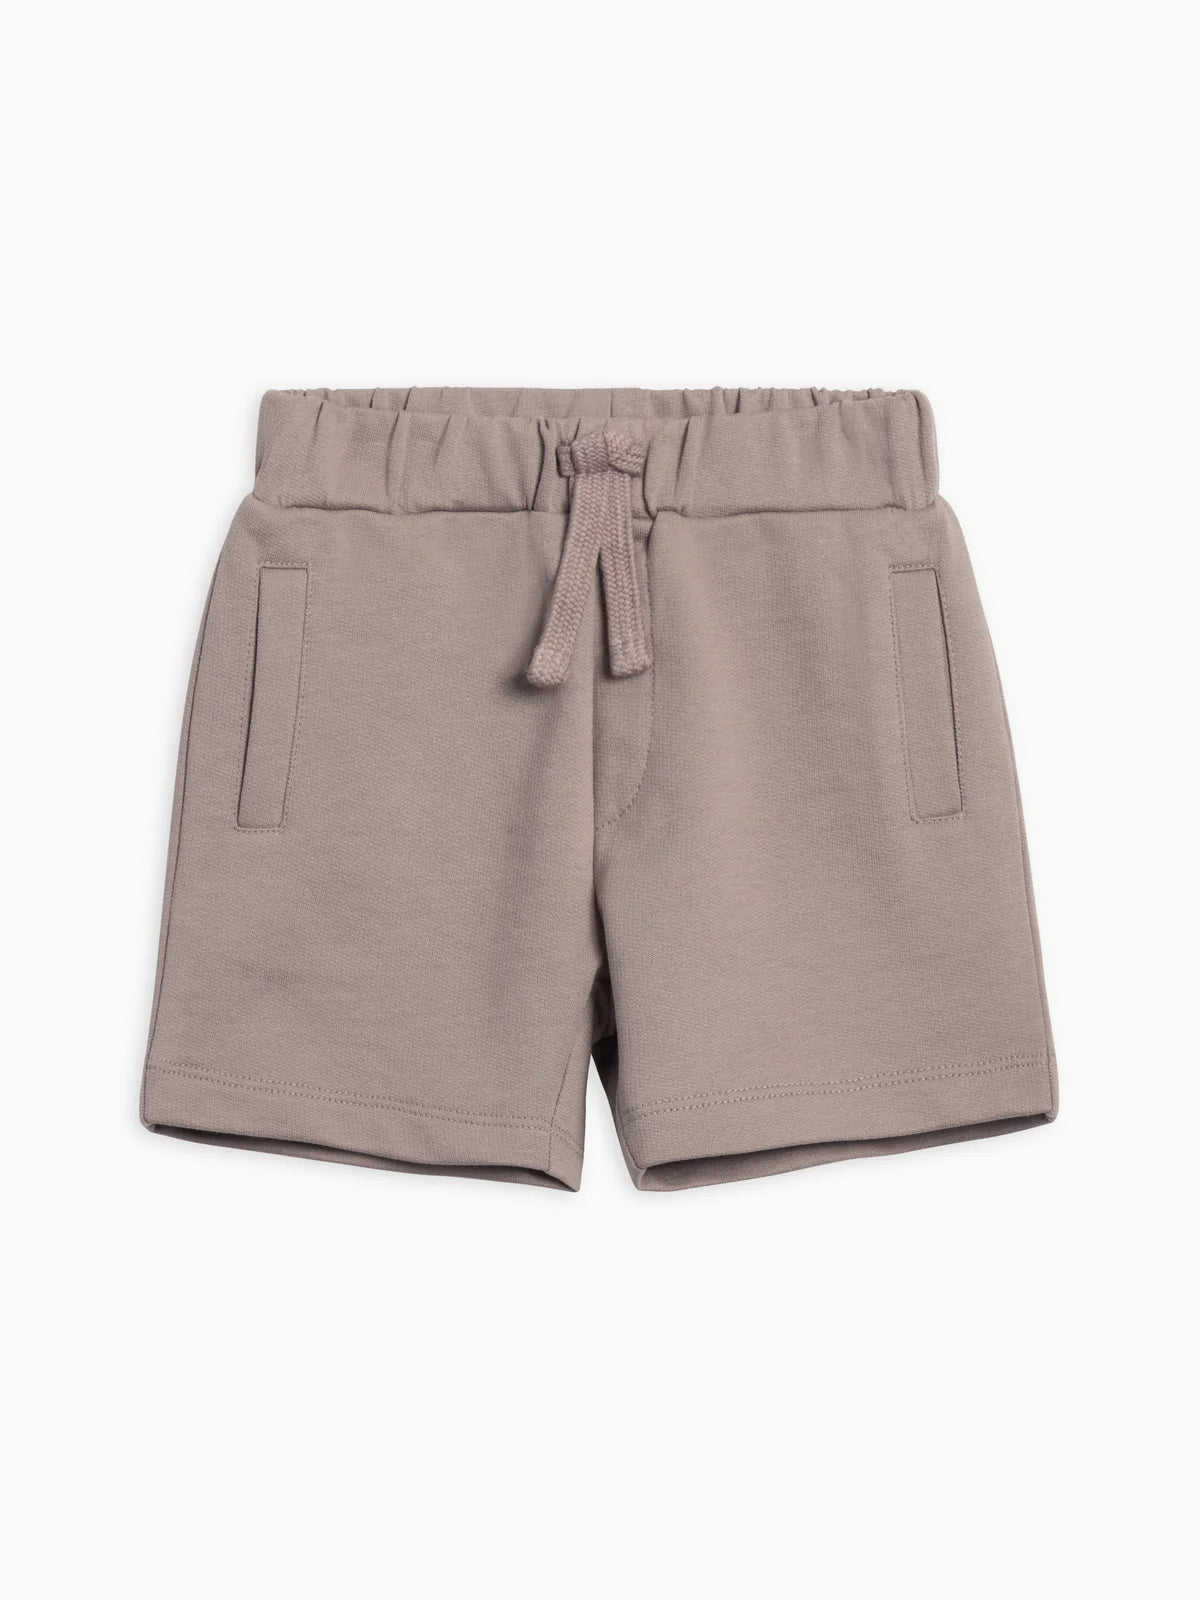 Colored Organics - Organic Baby Cove French Terry Welt Pocket Short - Pebble